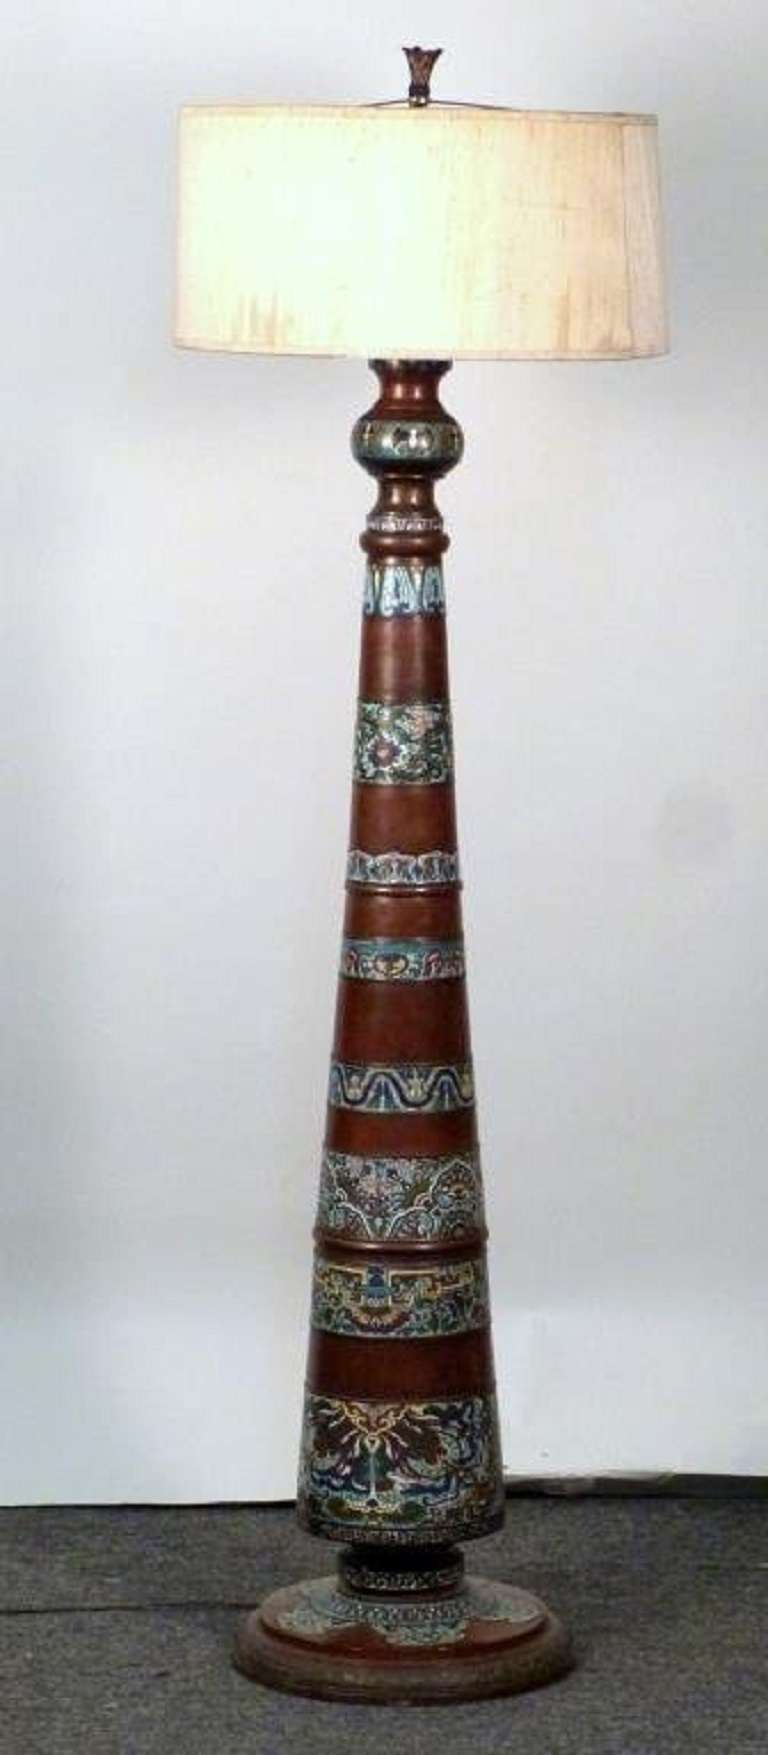 This Chinese Champleve floor lamp has beautiful bands of intricate cloisonné decoration and a conical, metal form.